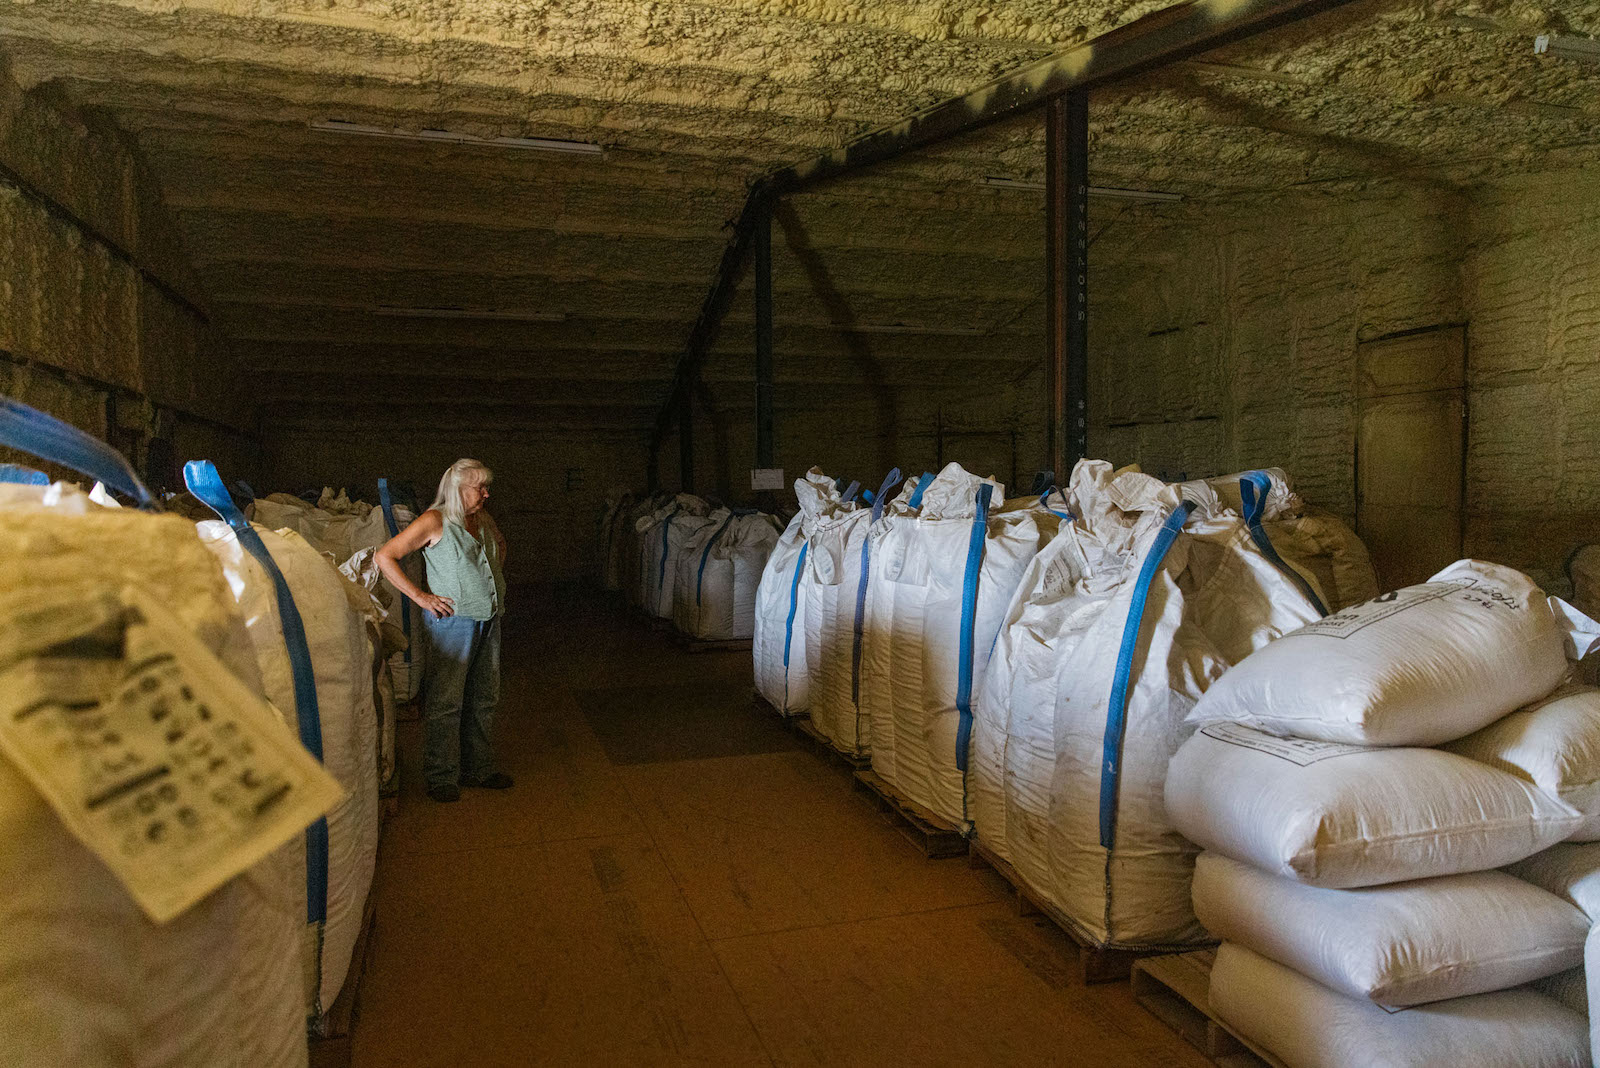 A senior woman stands in a large srorage room filled with stacks of large bags